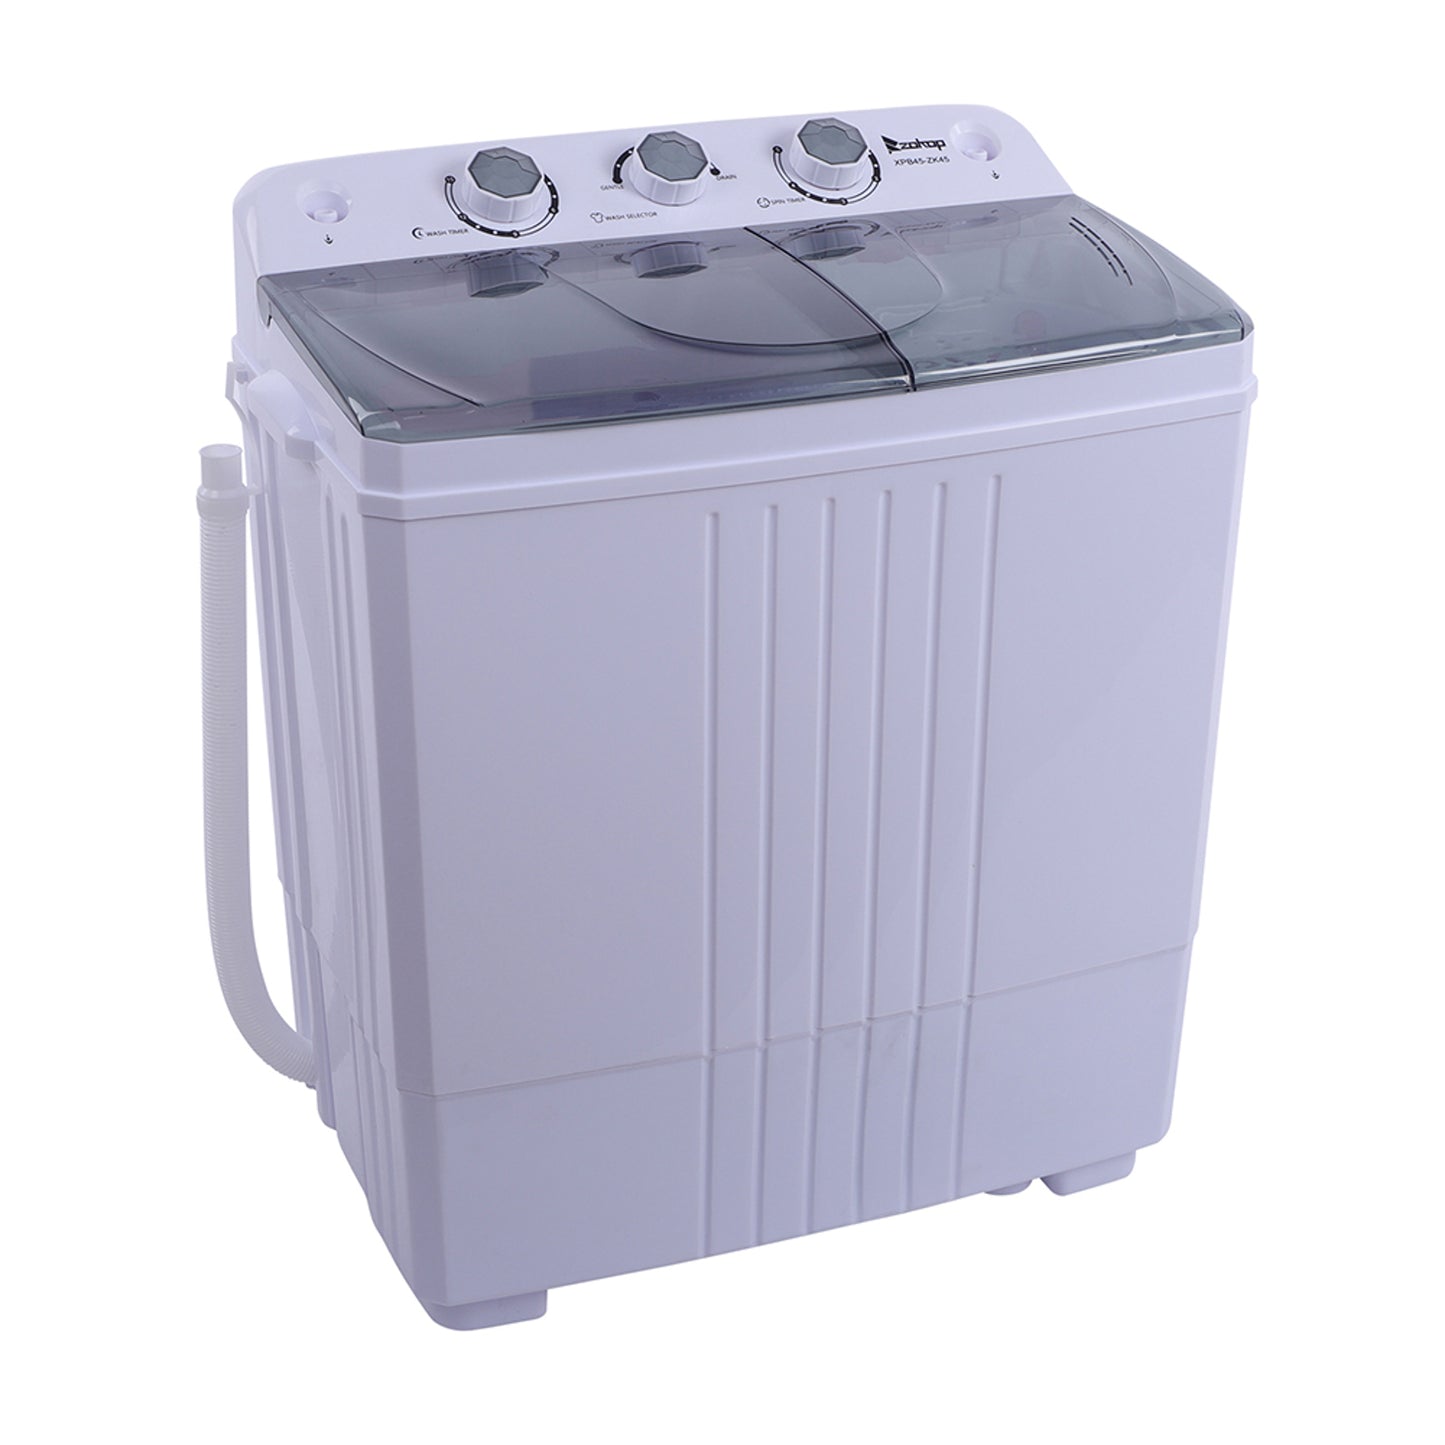 XPB45-ZK45 Compact Twin Tub with Built-in Drain Pump